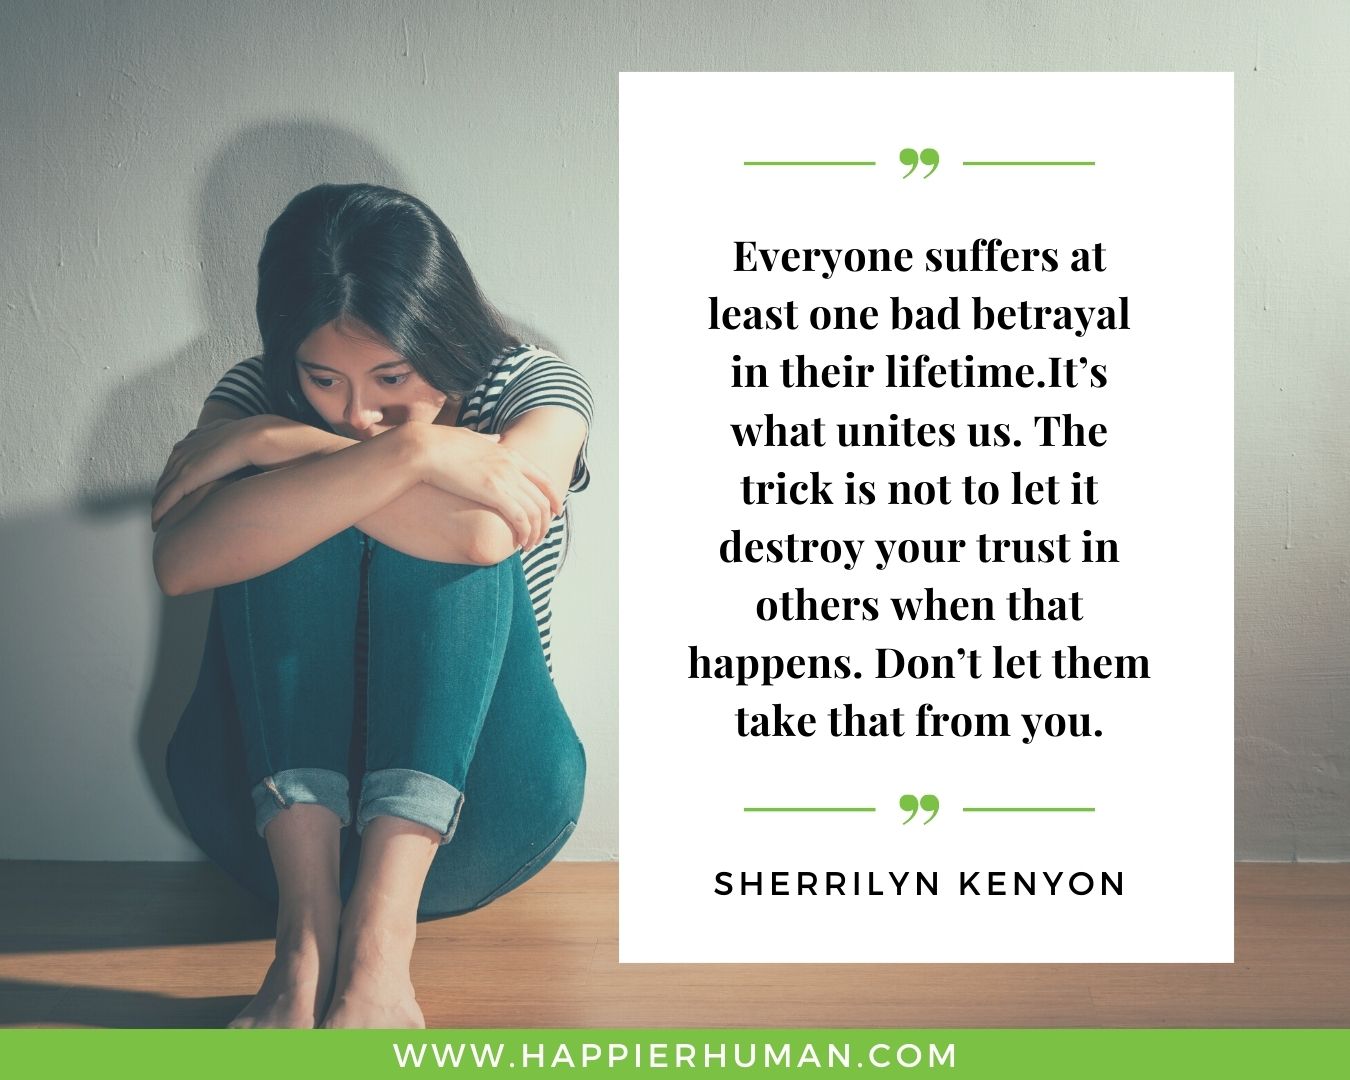 Broken Trust Quotes - “Everyone suffers at least one bad betrayal in their lifetime.It’s what unites us. The trick is not to let it destroy your trust in others when that happens. Don’t let them take that from you.” - Sherrilyn Kenyon